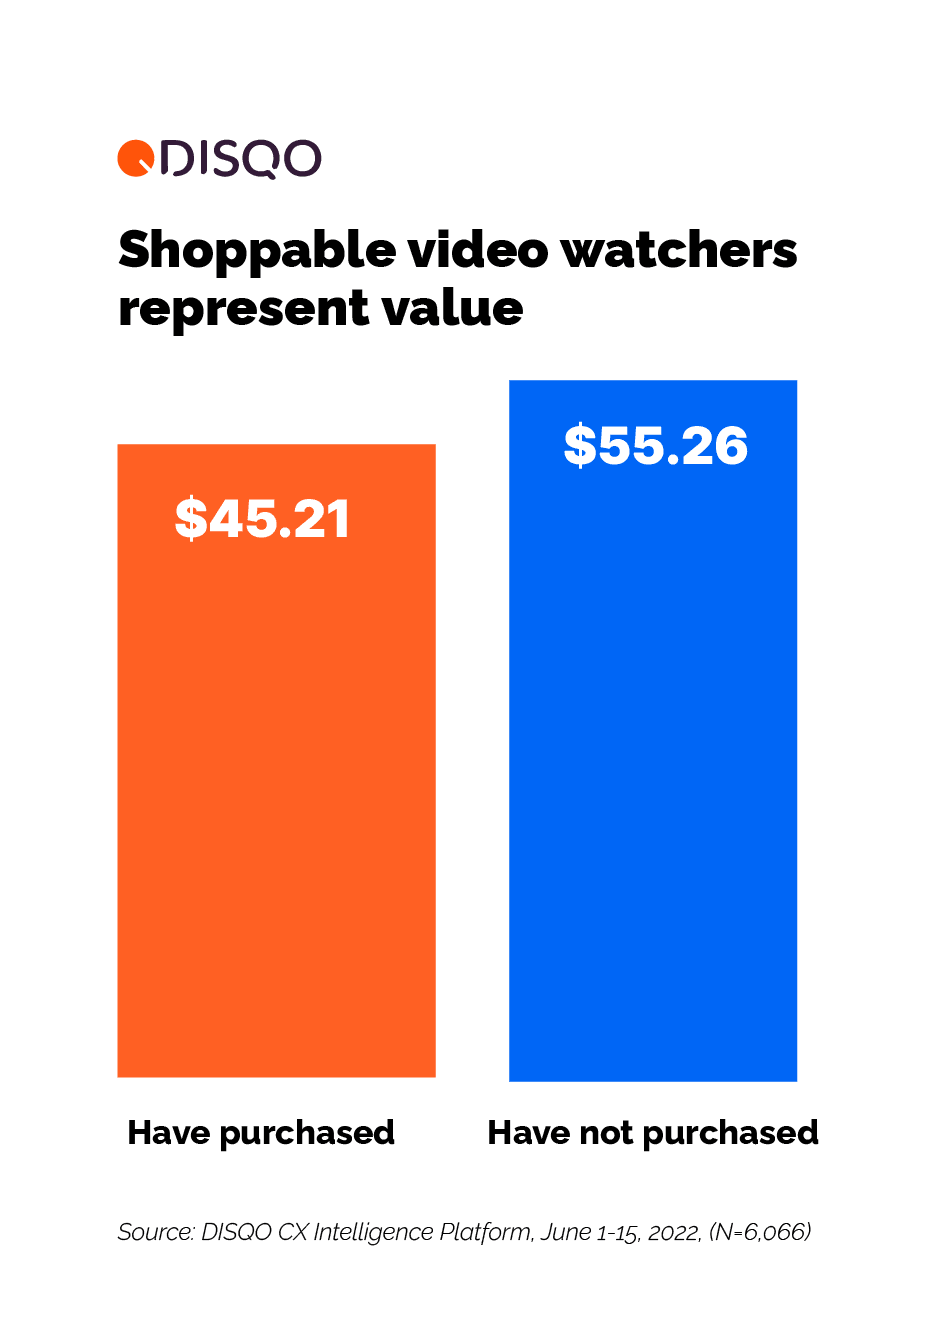 Those who watch, but haven’t purchased yet spend more online